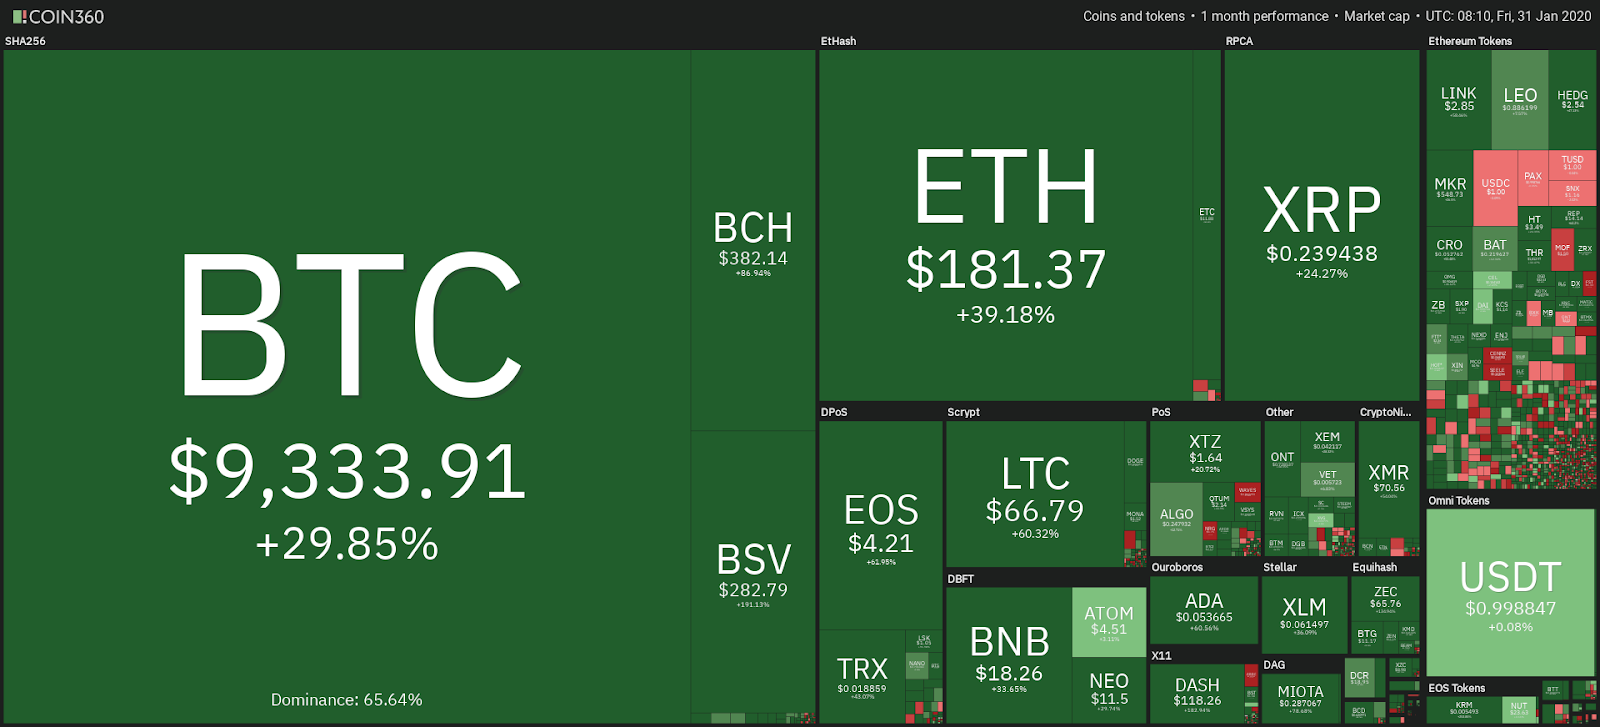 Cryptocurrency market monthly performance